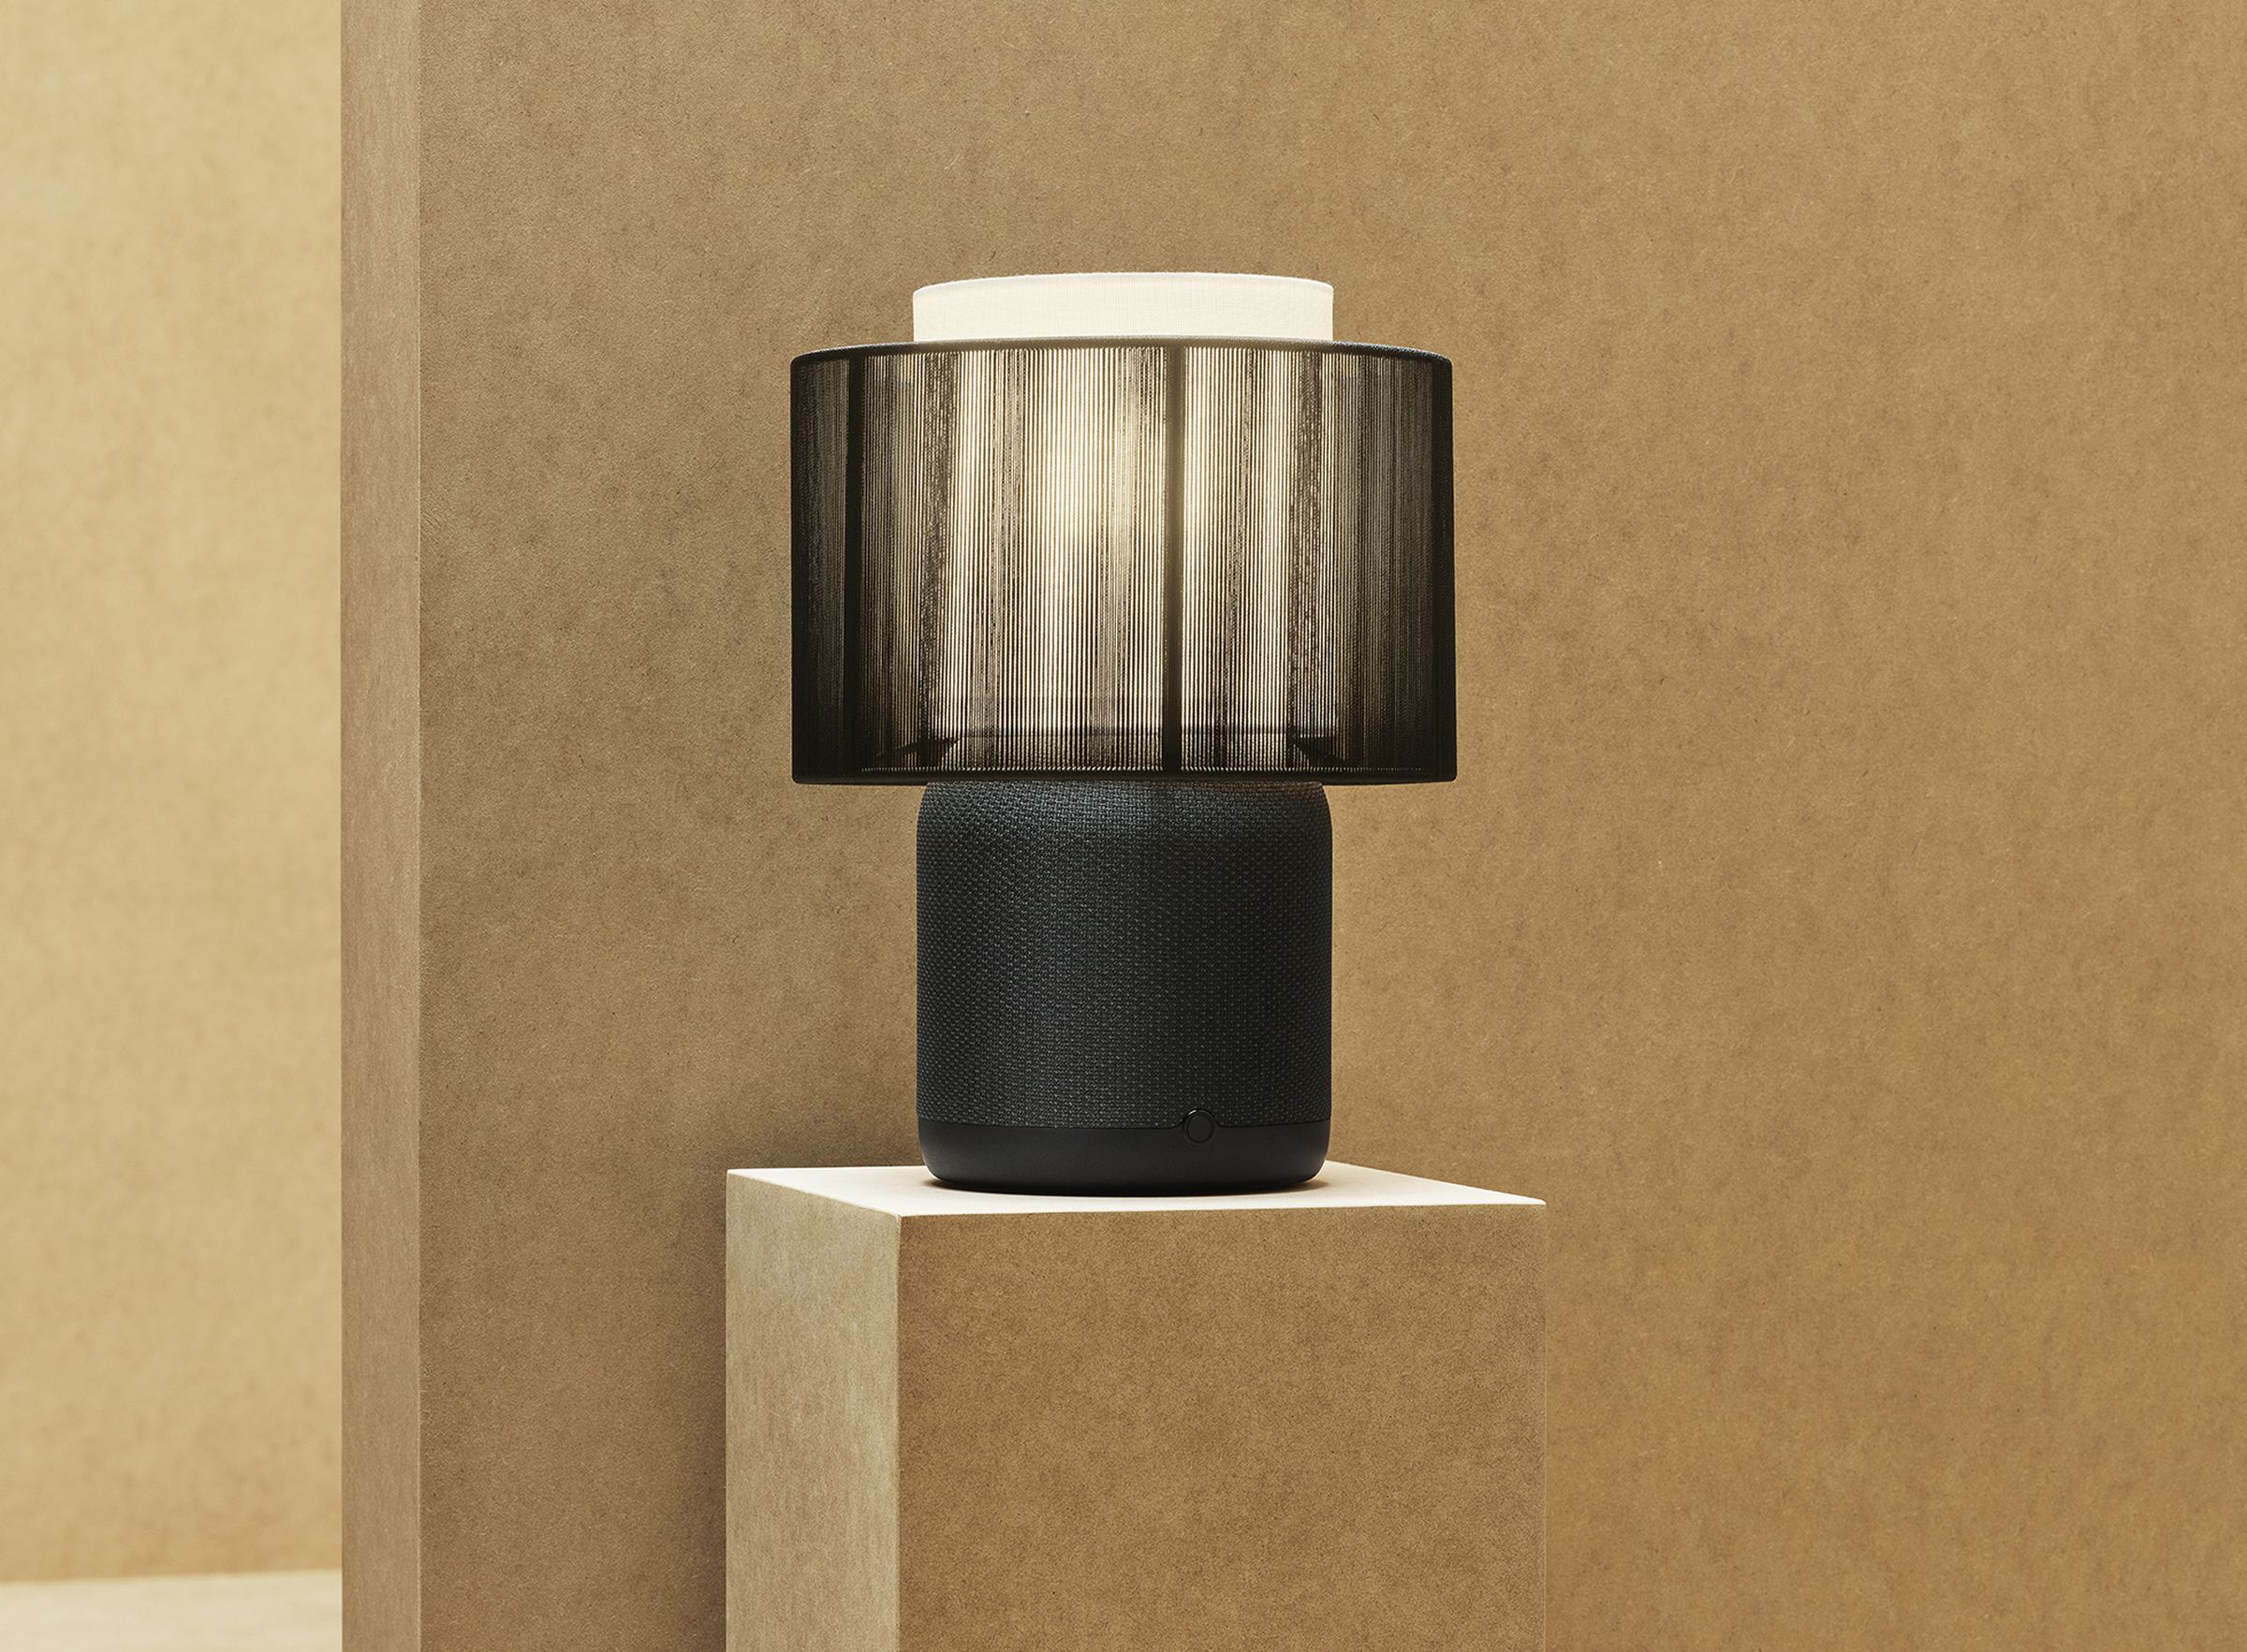 The textile lampshade has a much different look.